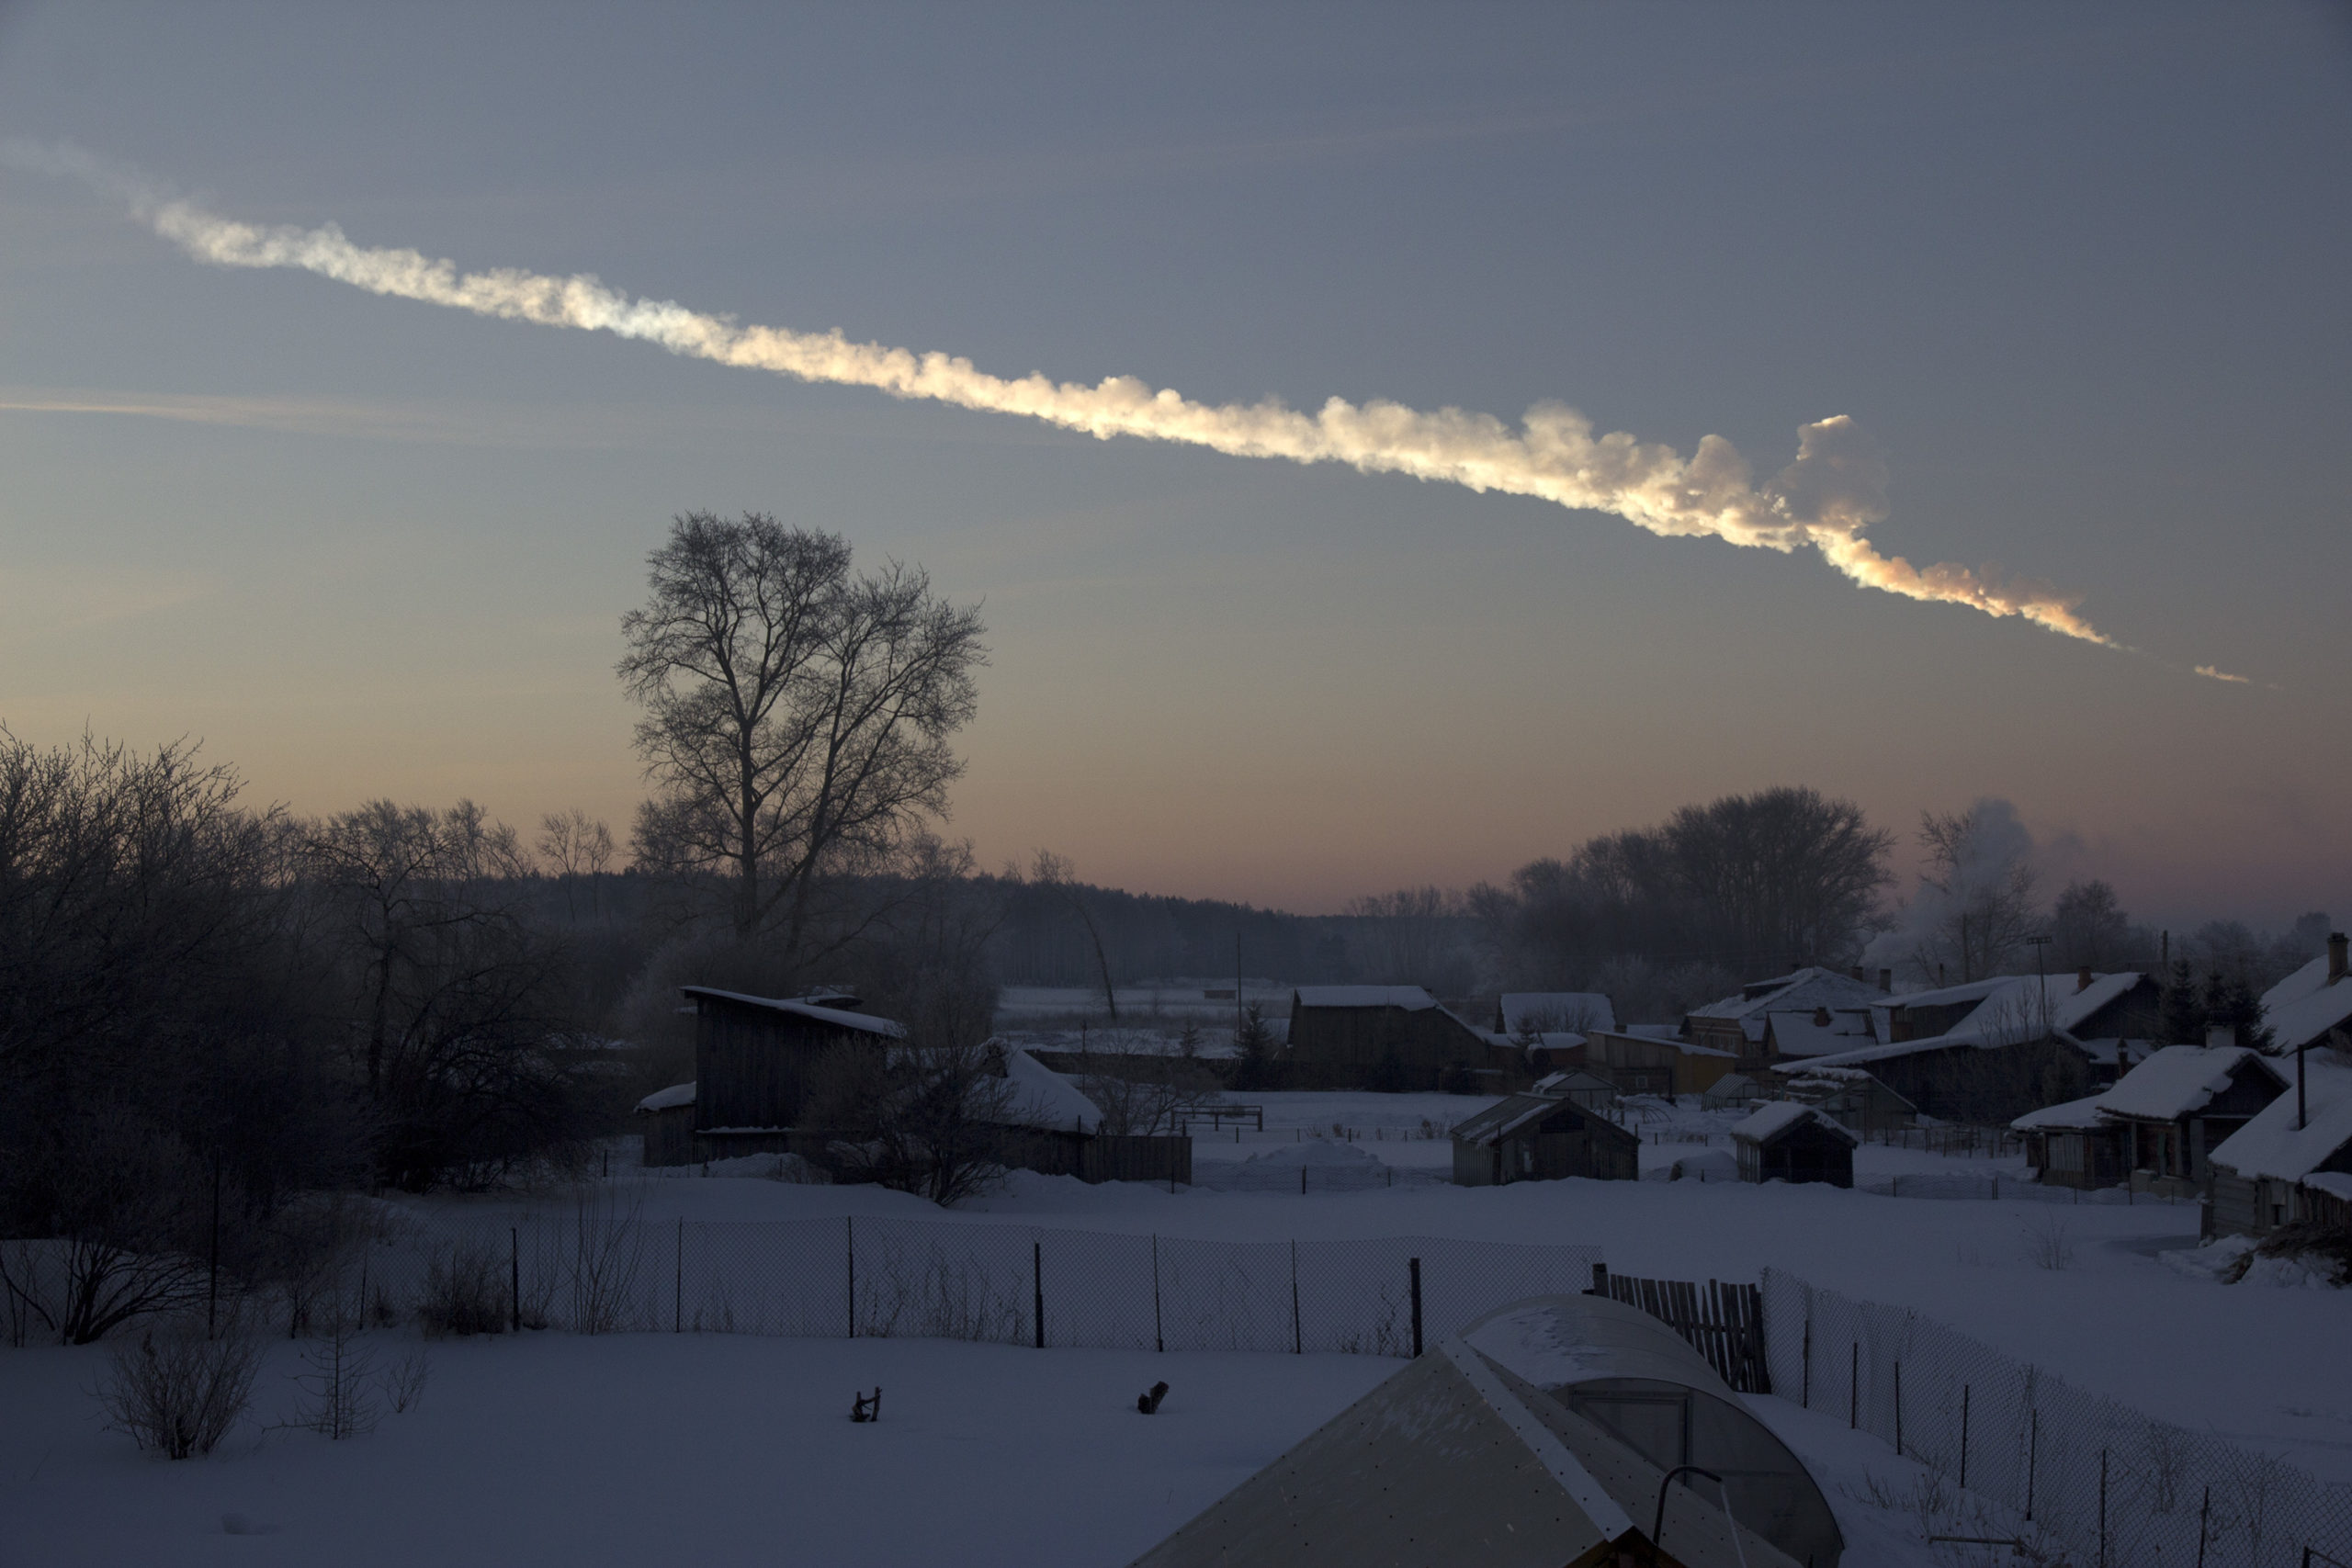 The smoke trail produced by the Chelyabinsk meteor in 2013. (Image: Alex Alishevskikh, Fair Use)